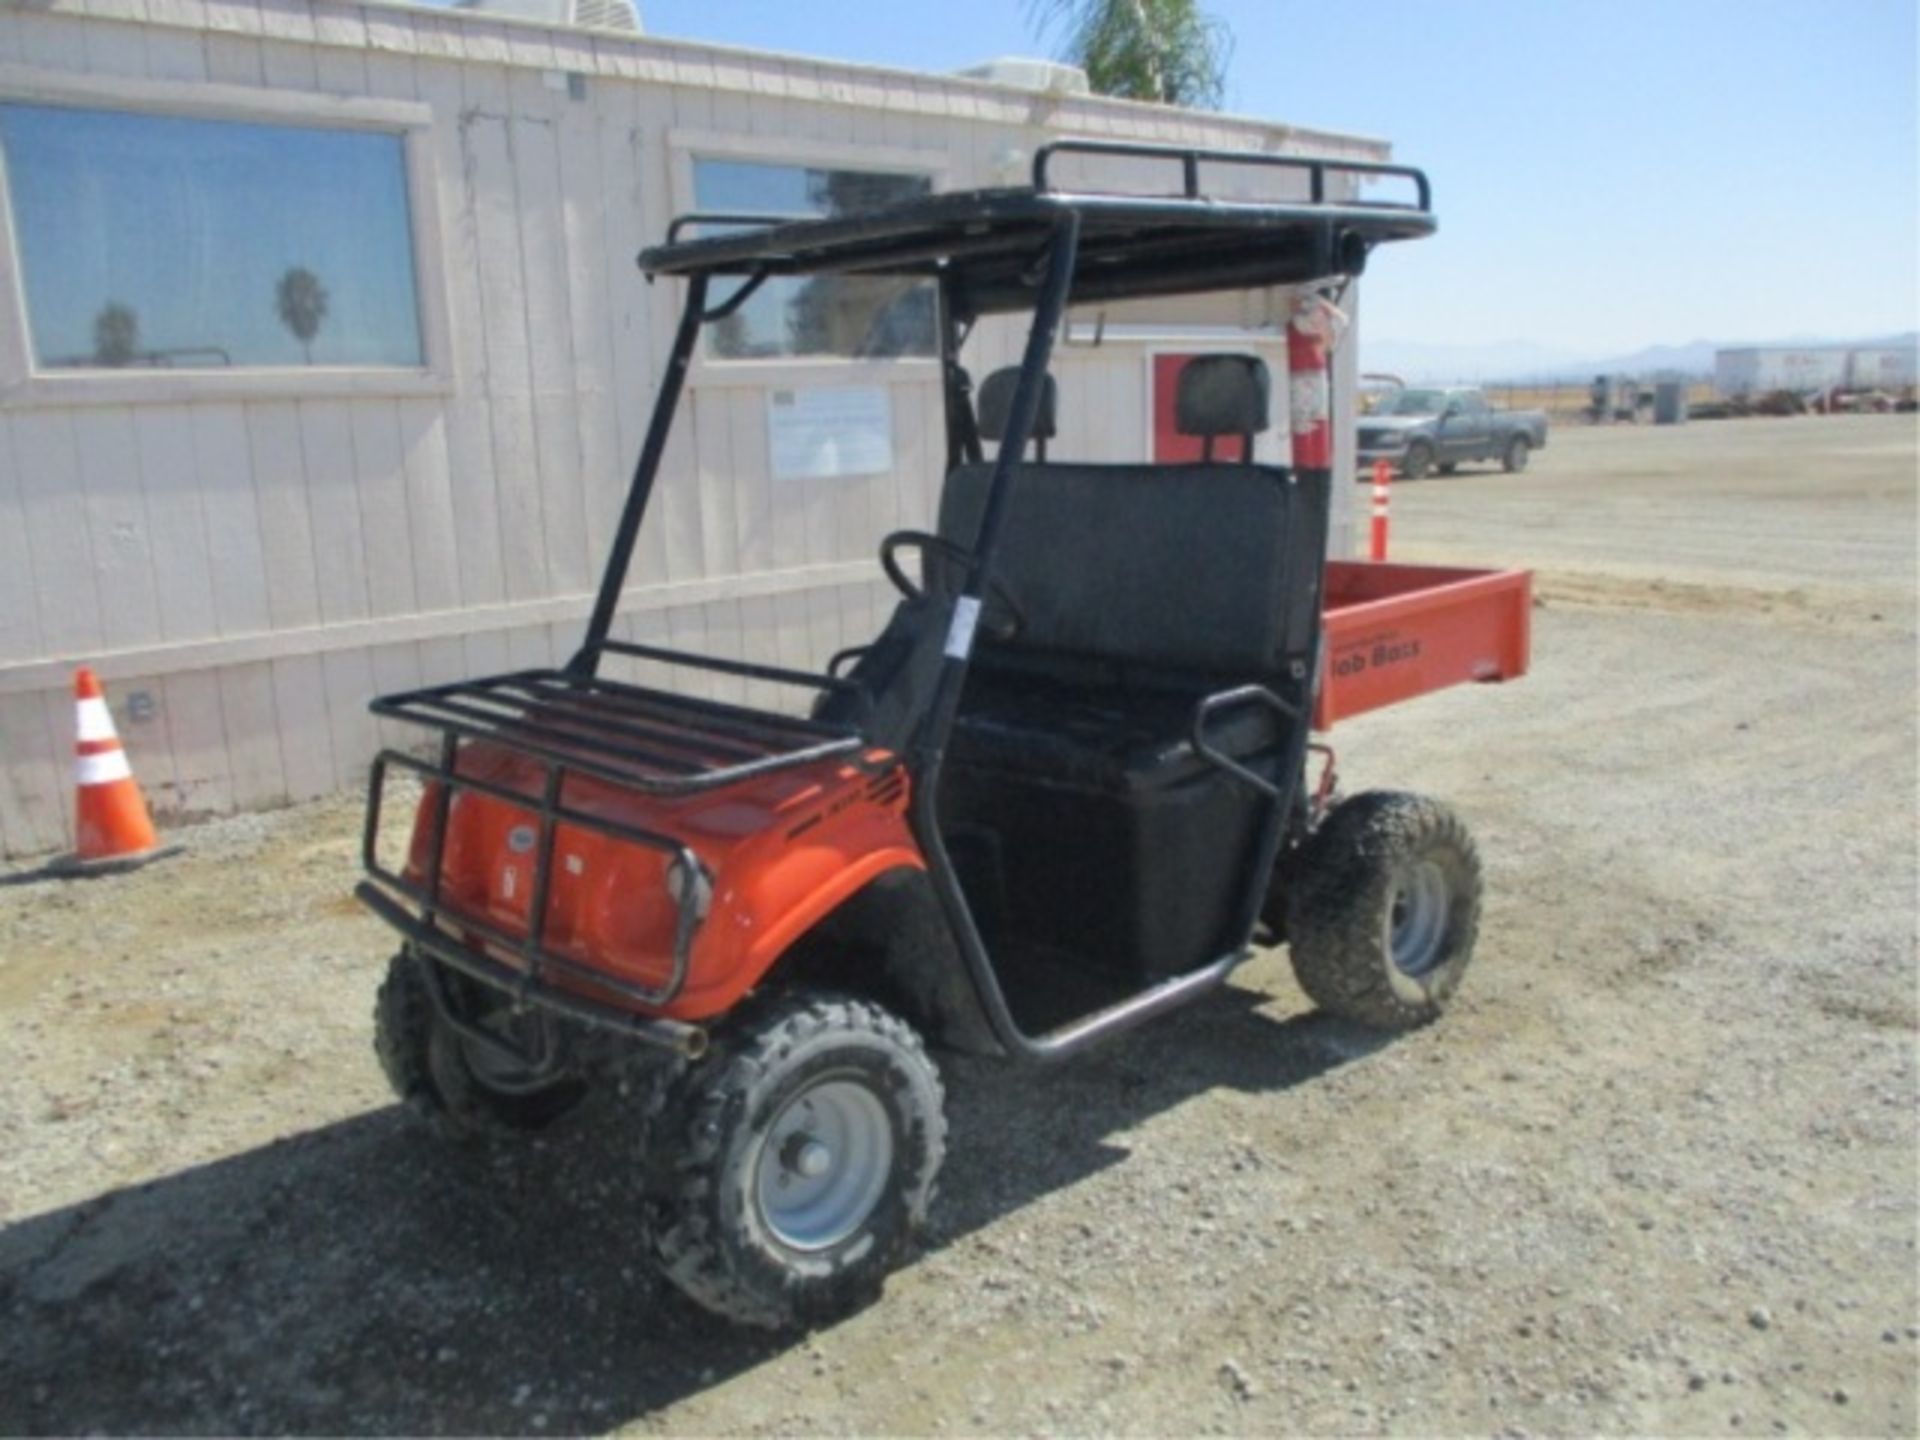 2008 American Sportworks Job Boss Utility Cart, Honda Gas, Rear Metal Dump Bed, Canopy, Tow Hitch, - Image 2 of 50